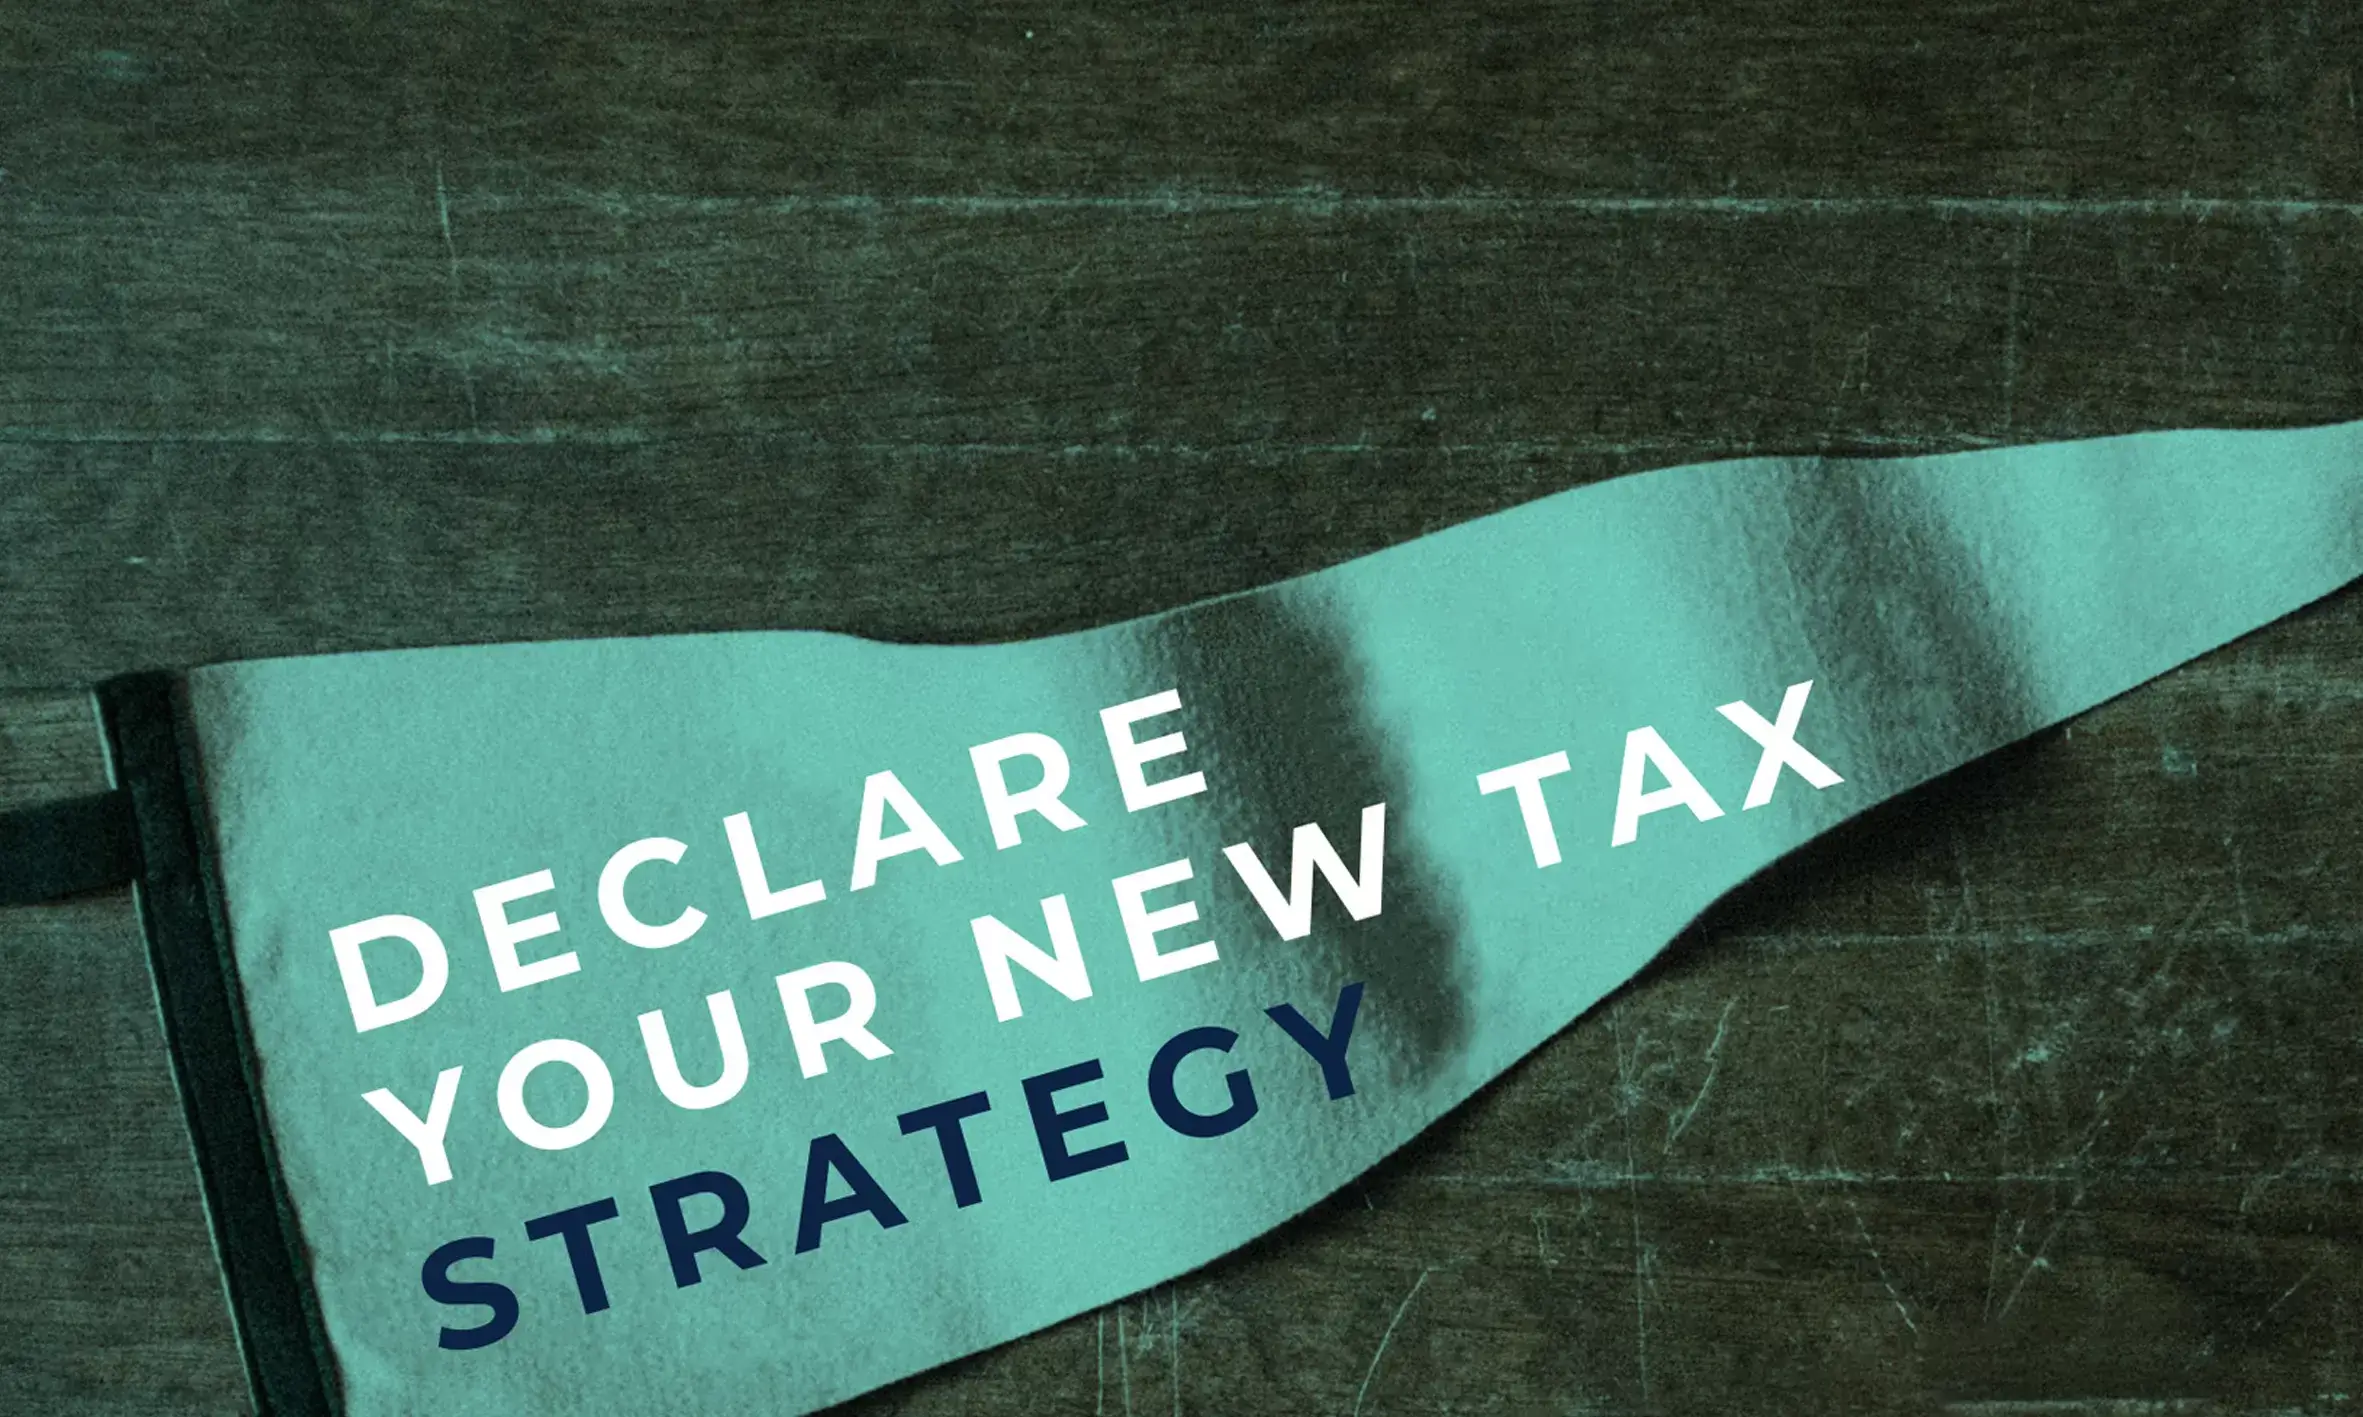 A Brief Guide To Innovating Tax With Analytics